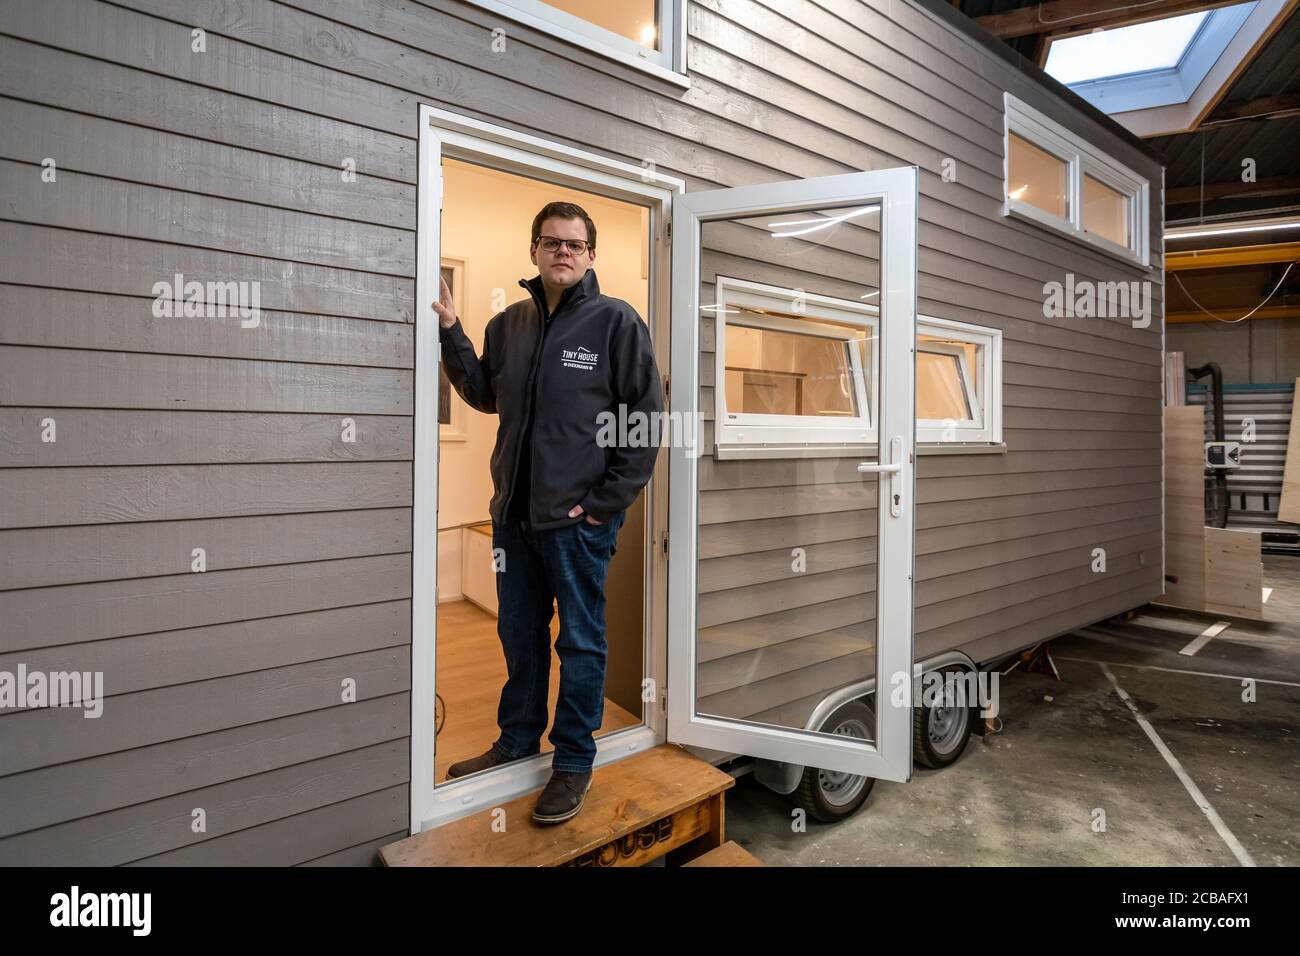 Tiny houses have been built in Stefan Diekmann's carpentry workshop in Hamm-Bockum-Hövel  since 2015, when the boom in mini houses began. Different models are  manufactured by the 40 employees. The Diekmann company